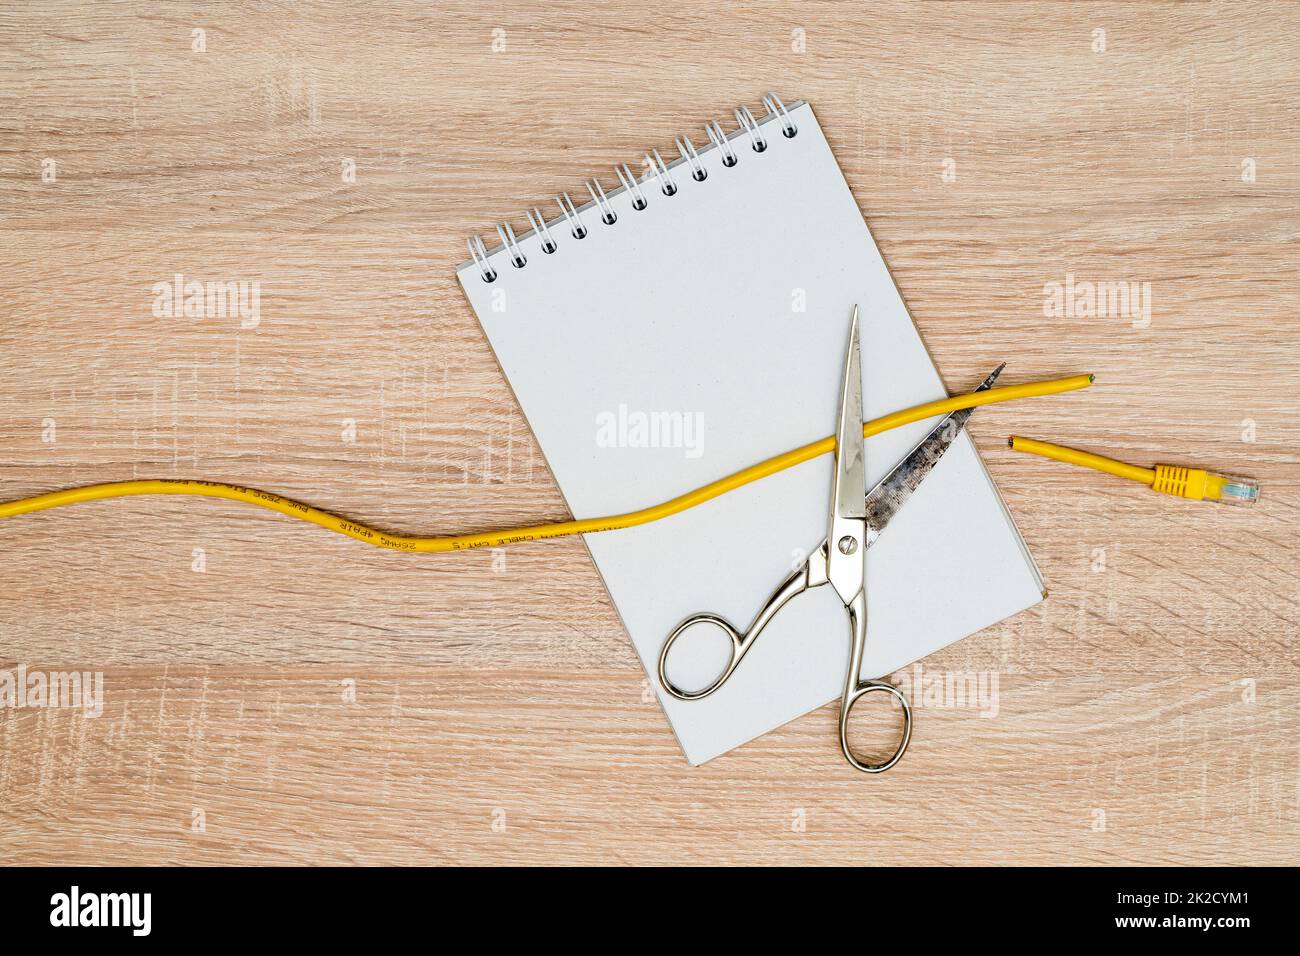 Scissors cutting data cable over a blank spiral notebook Stock Photo